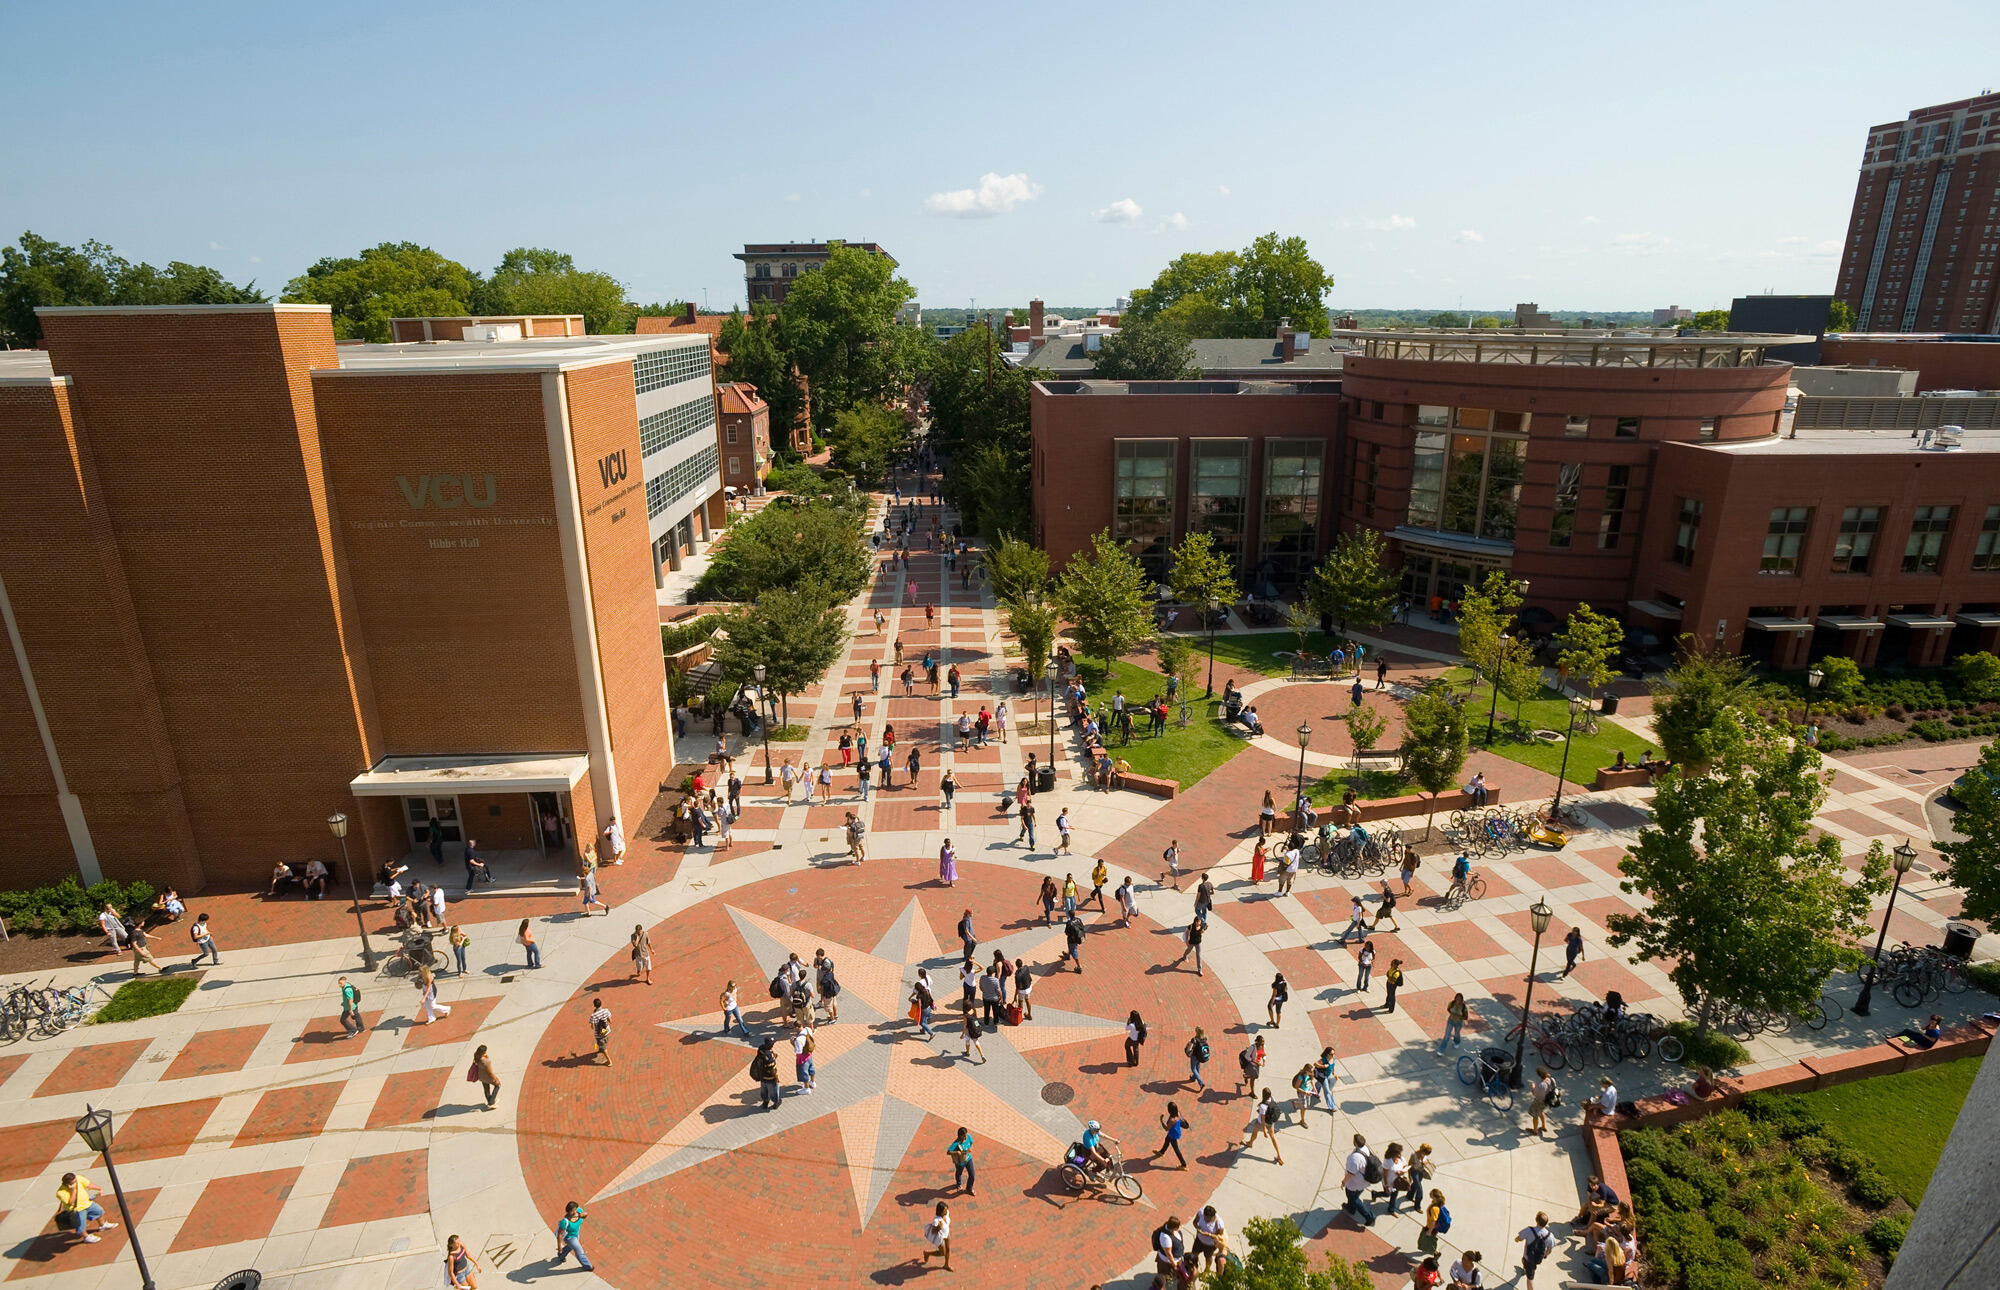 The bipartisan Omnibus Appropriations Agreement for Fiscal Year 2022 approved by Congress last week has funding for two VCU projects. (VCU Marketing)